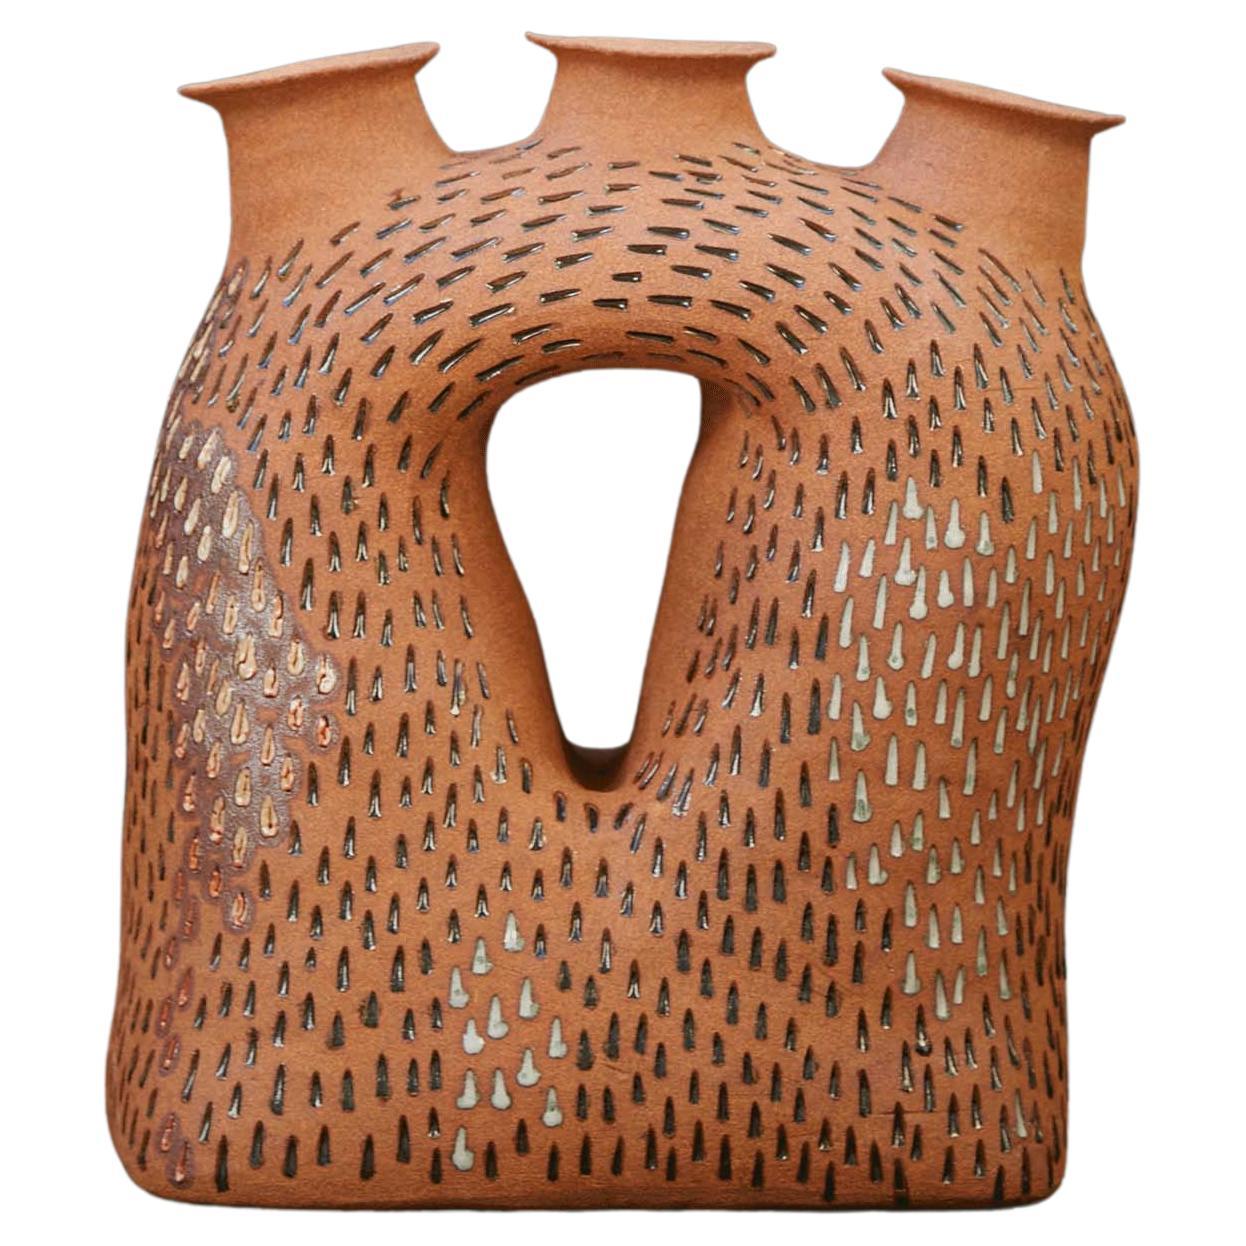 AW12 Vessel by Ceramic Artist Addison Woolsey